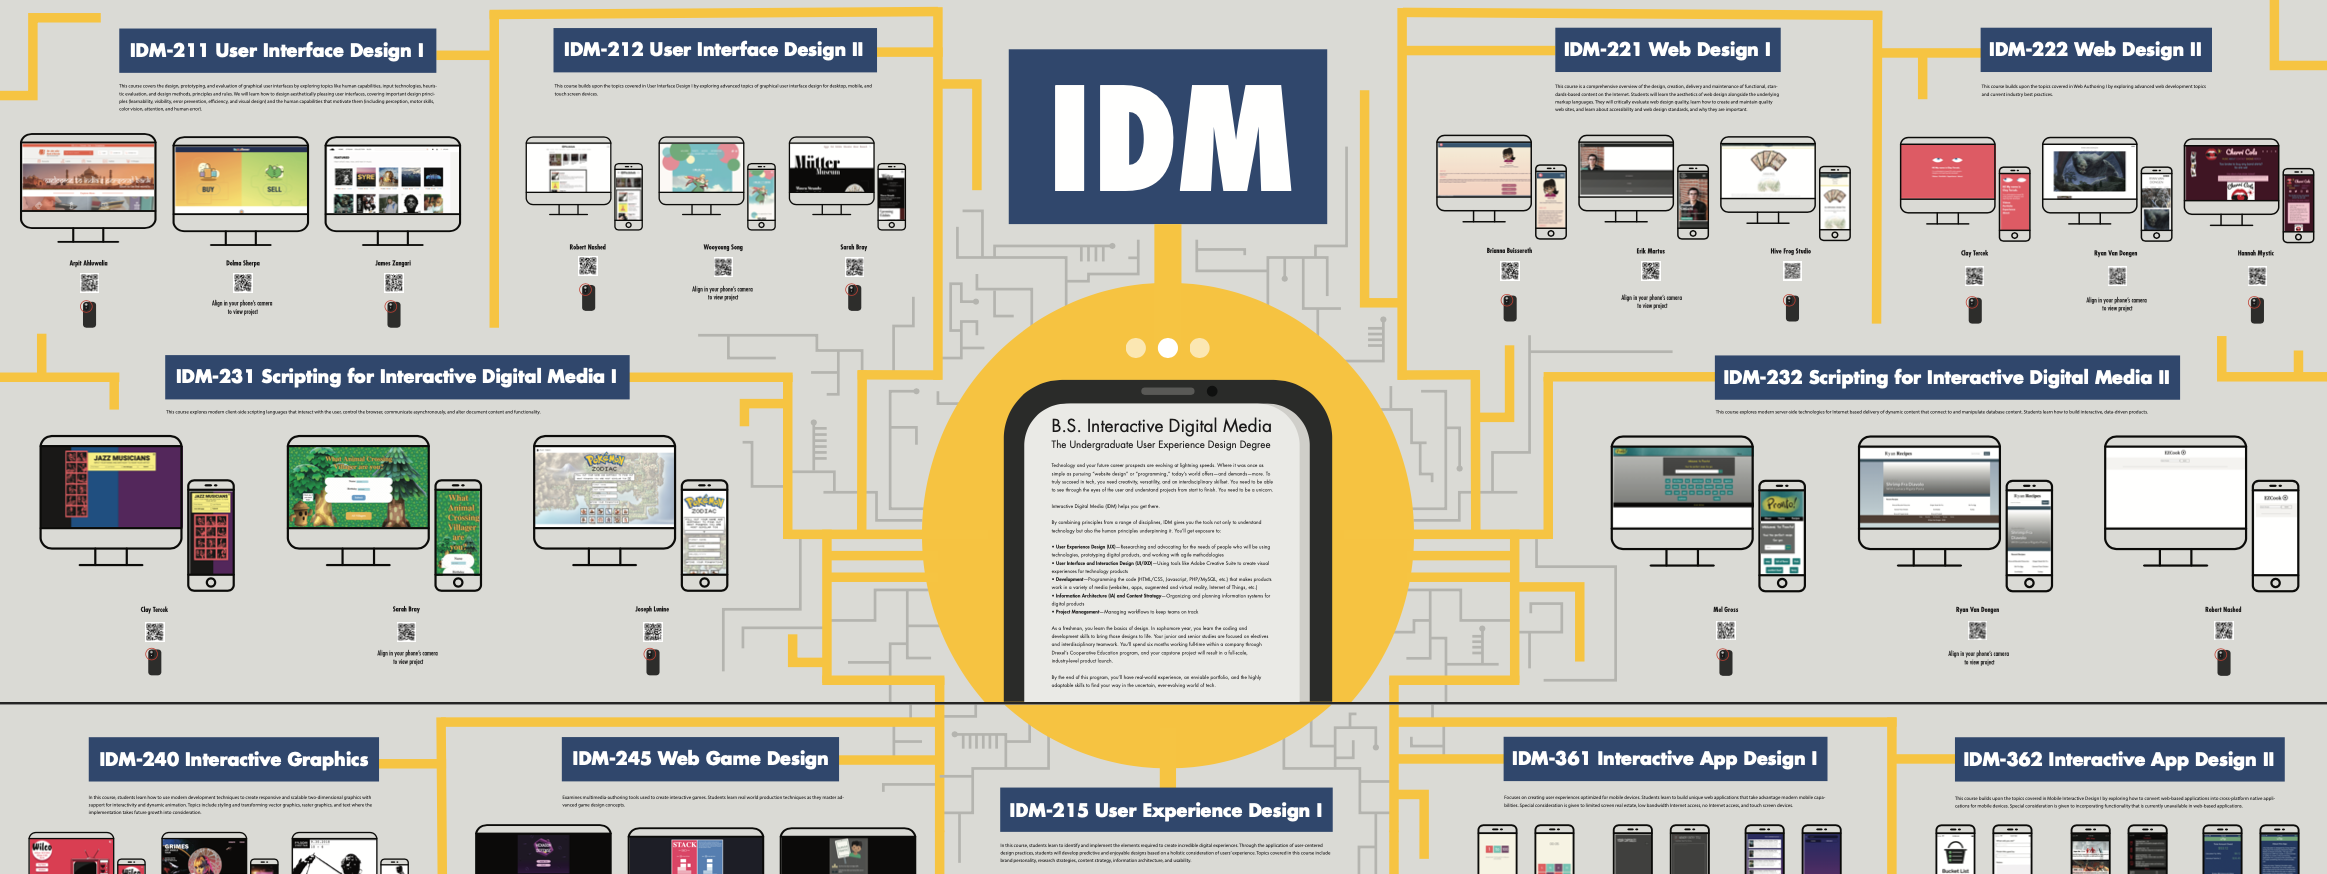 Static Image of Interative Digital Media User Experience - Poster 1